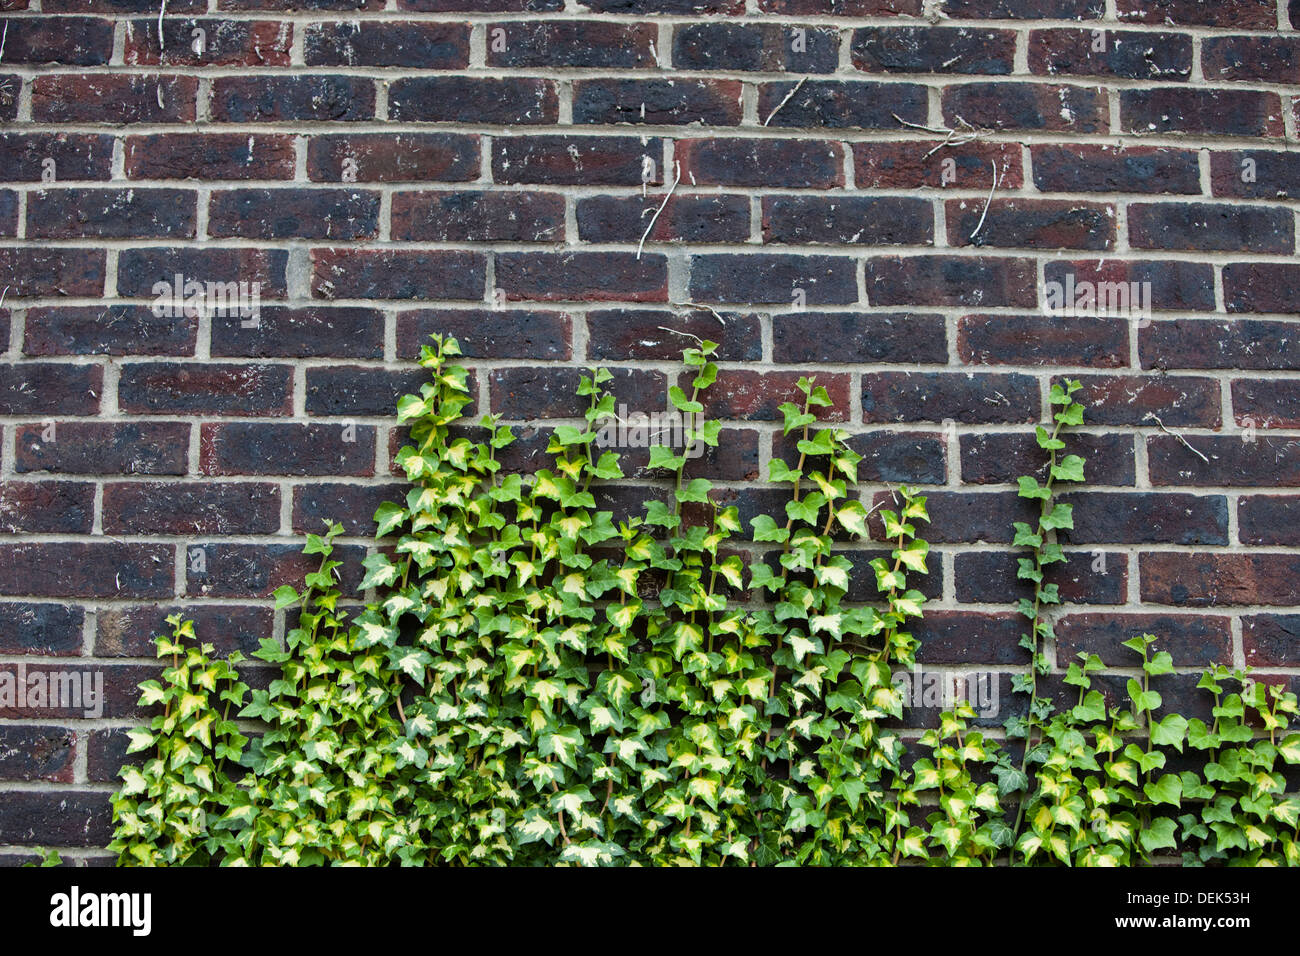 Concrete wall with ivy growing up it Stock Photo